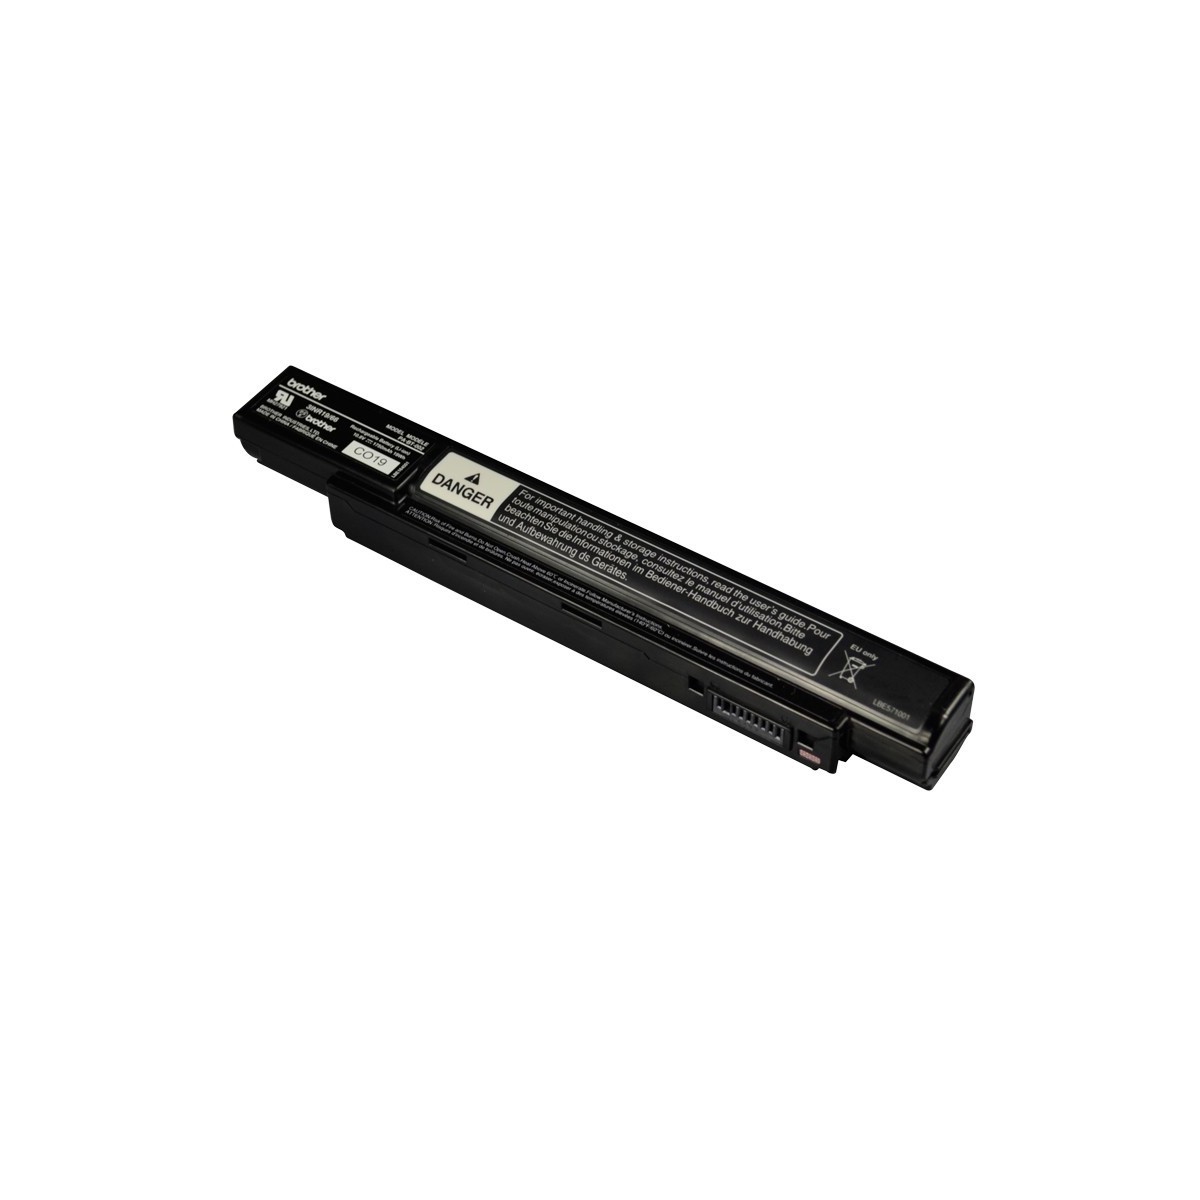 Brother PA-BT-002 - Battery - Black - 1 pc(s)